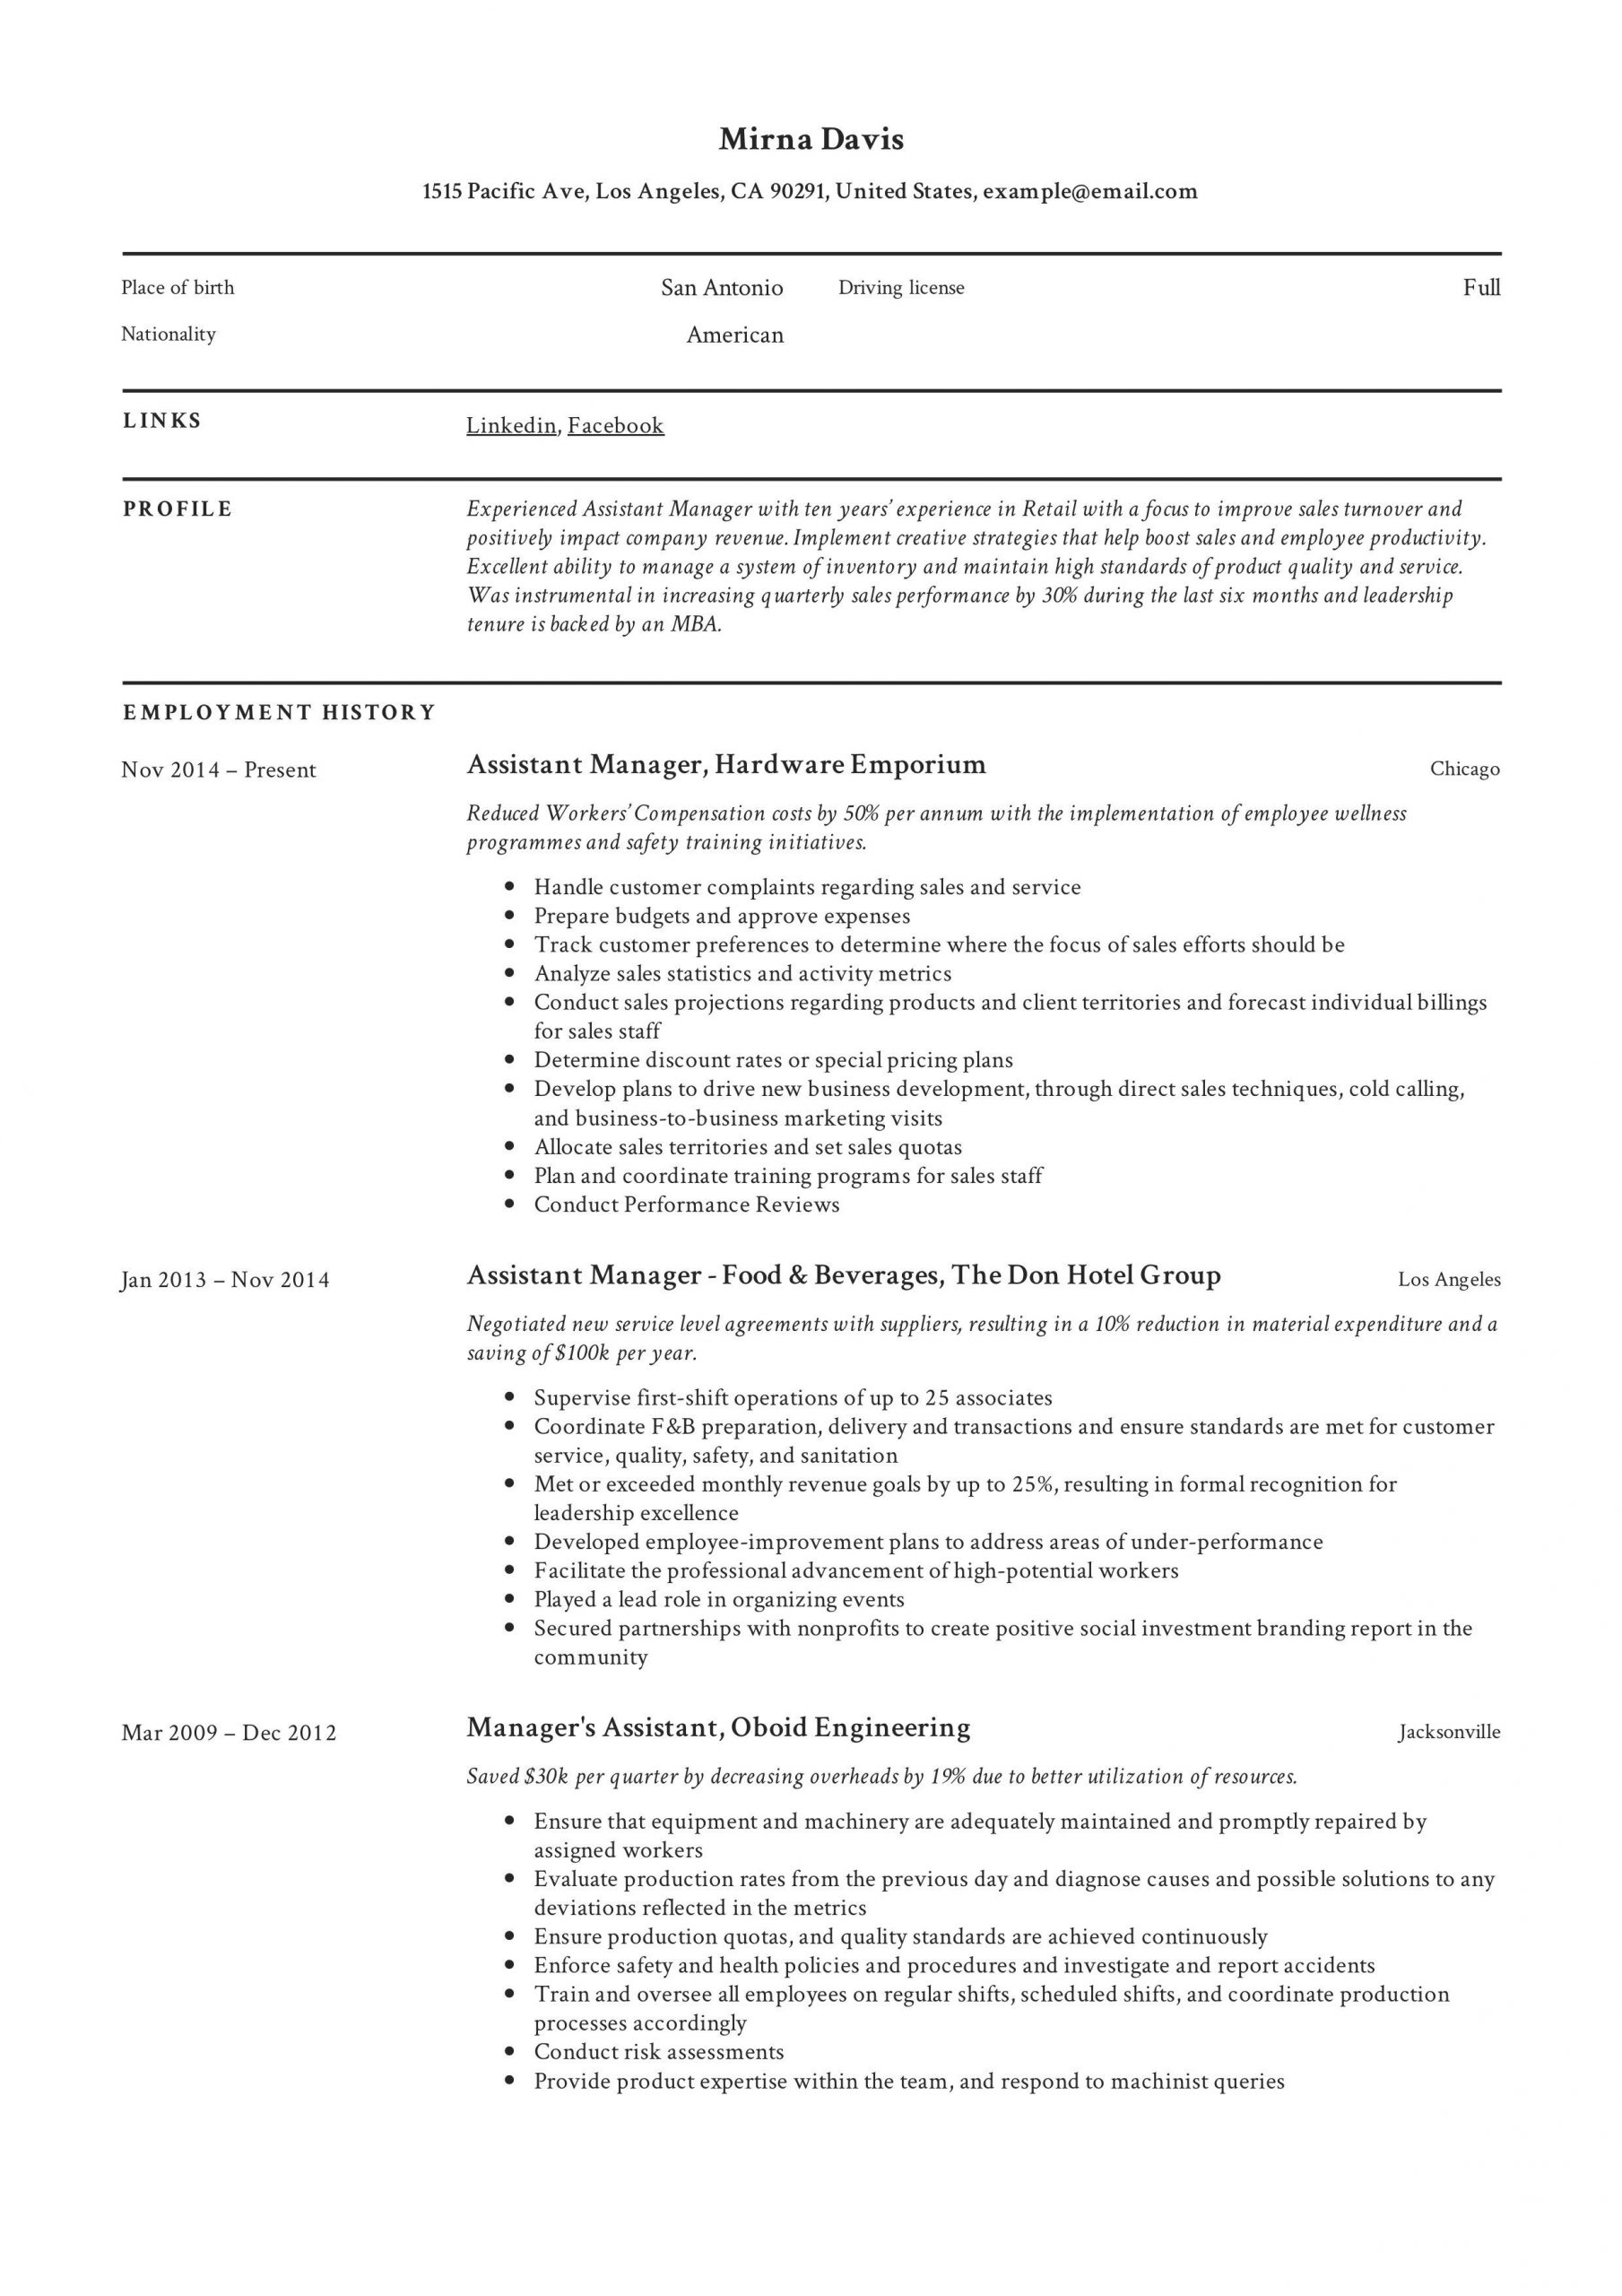 Resume Samples for Office assistant Job assistant Manager Resume Template Job Description Template …